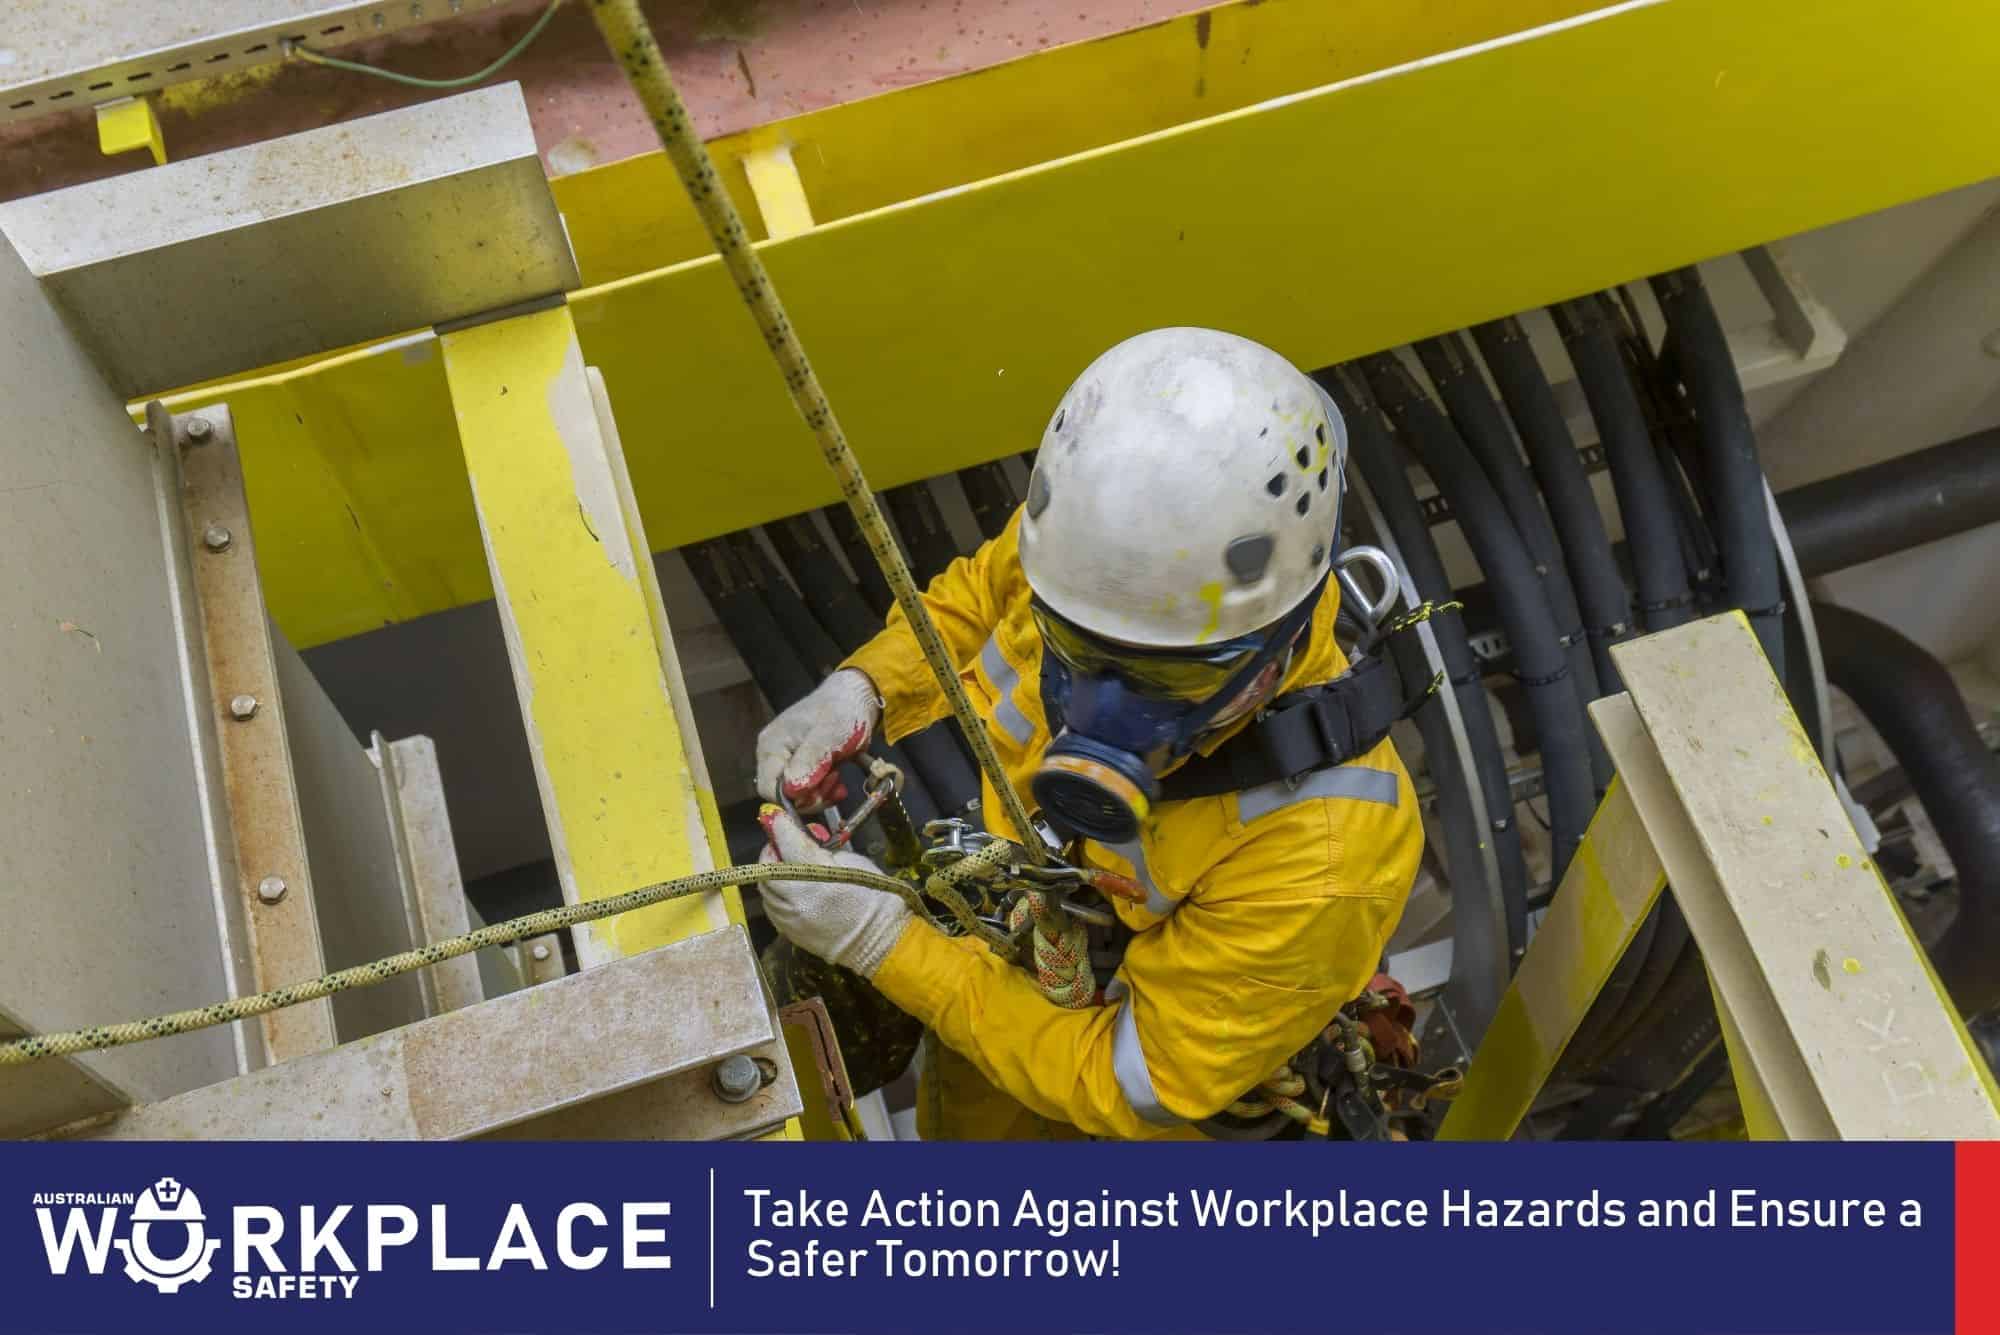 Take Action Against Workplace Hazards and Ensure a Safer Tomorrow!